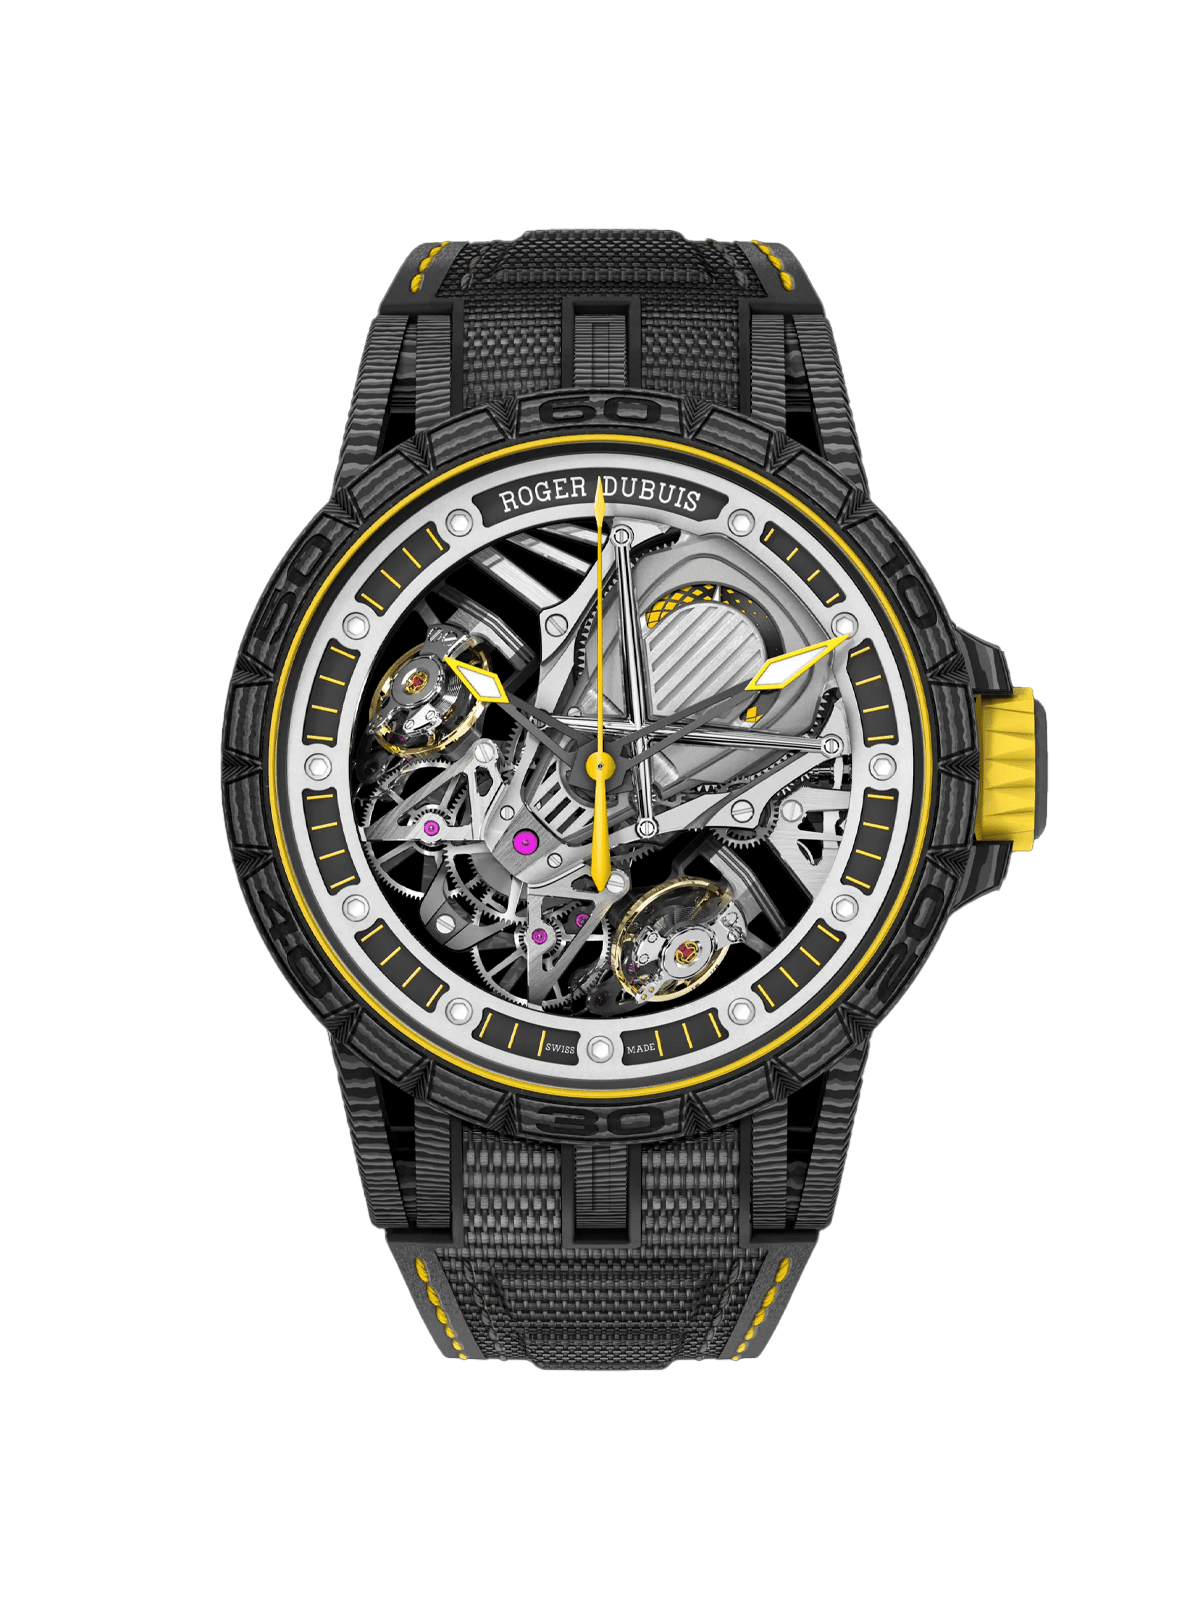 Excalibur Spider 45mm DBEX0613 Watches Roger Dubuis 